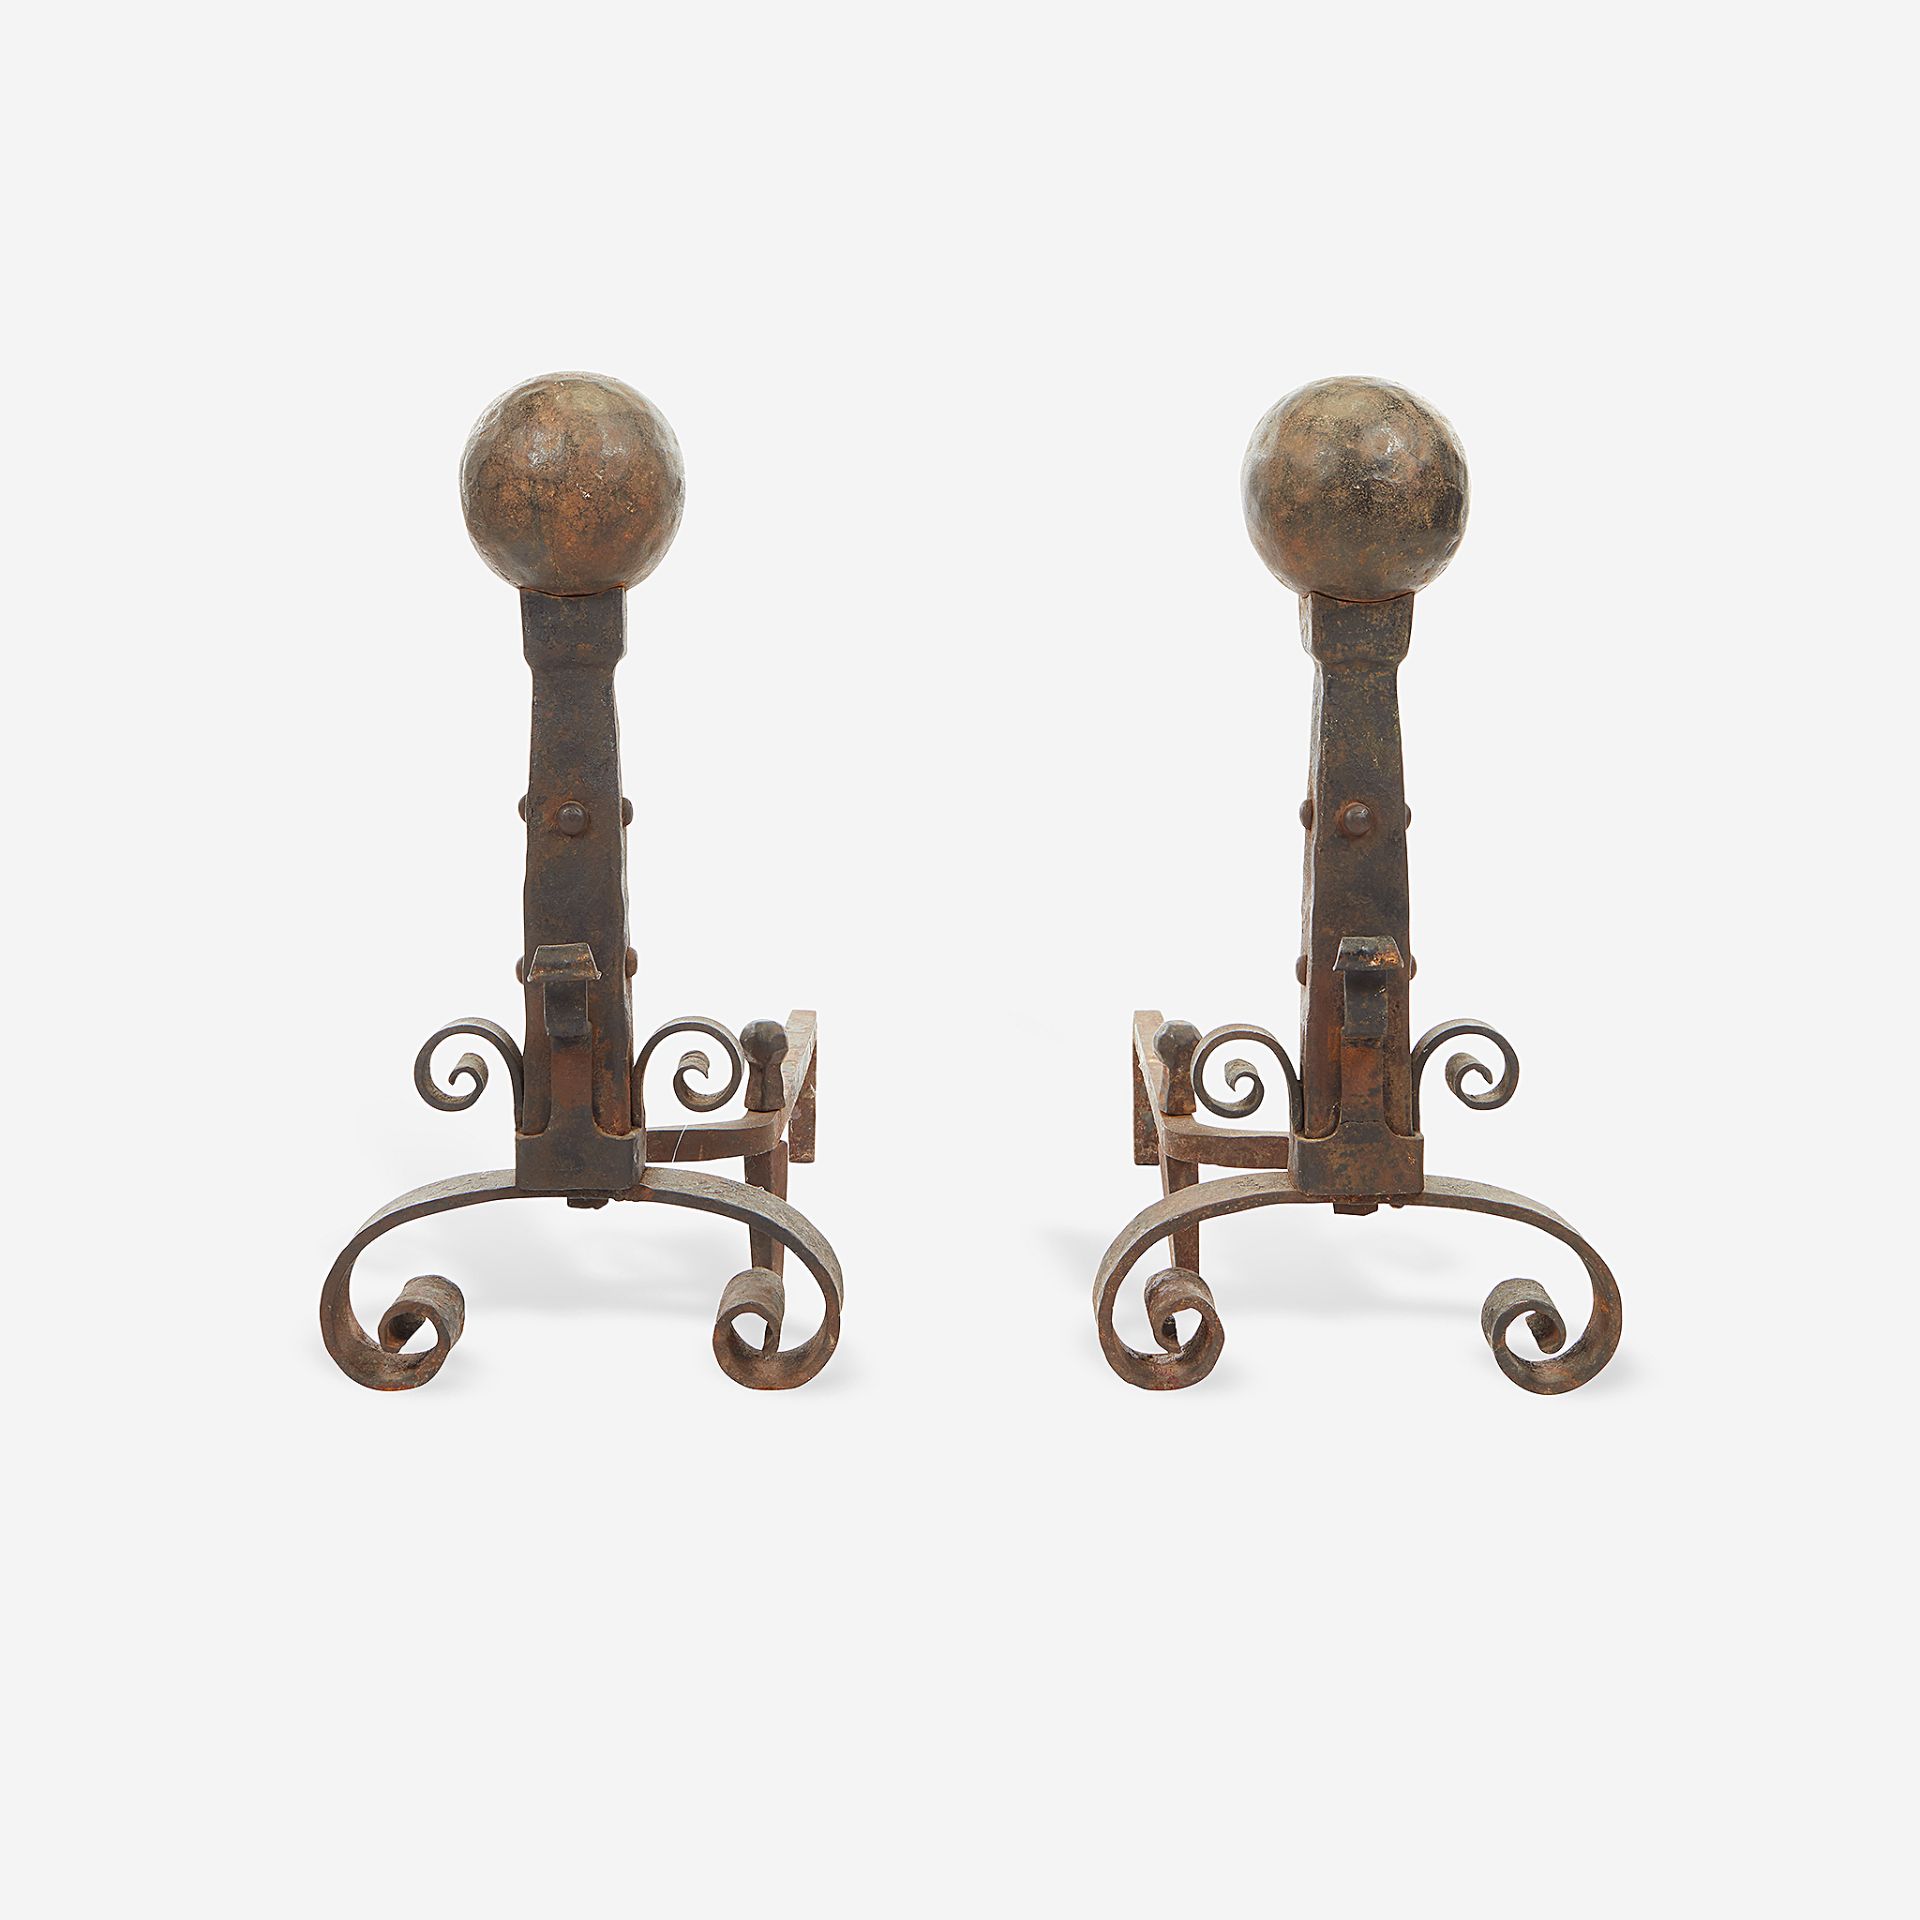 A pair of wrought iron andirons, Late 19th/early 20th century